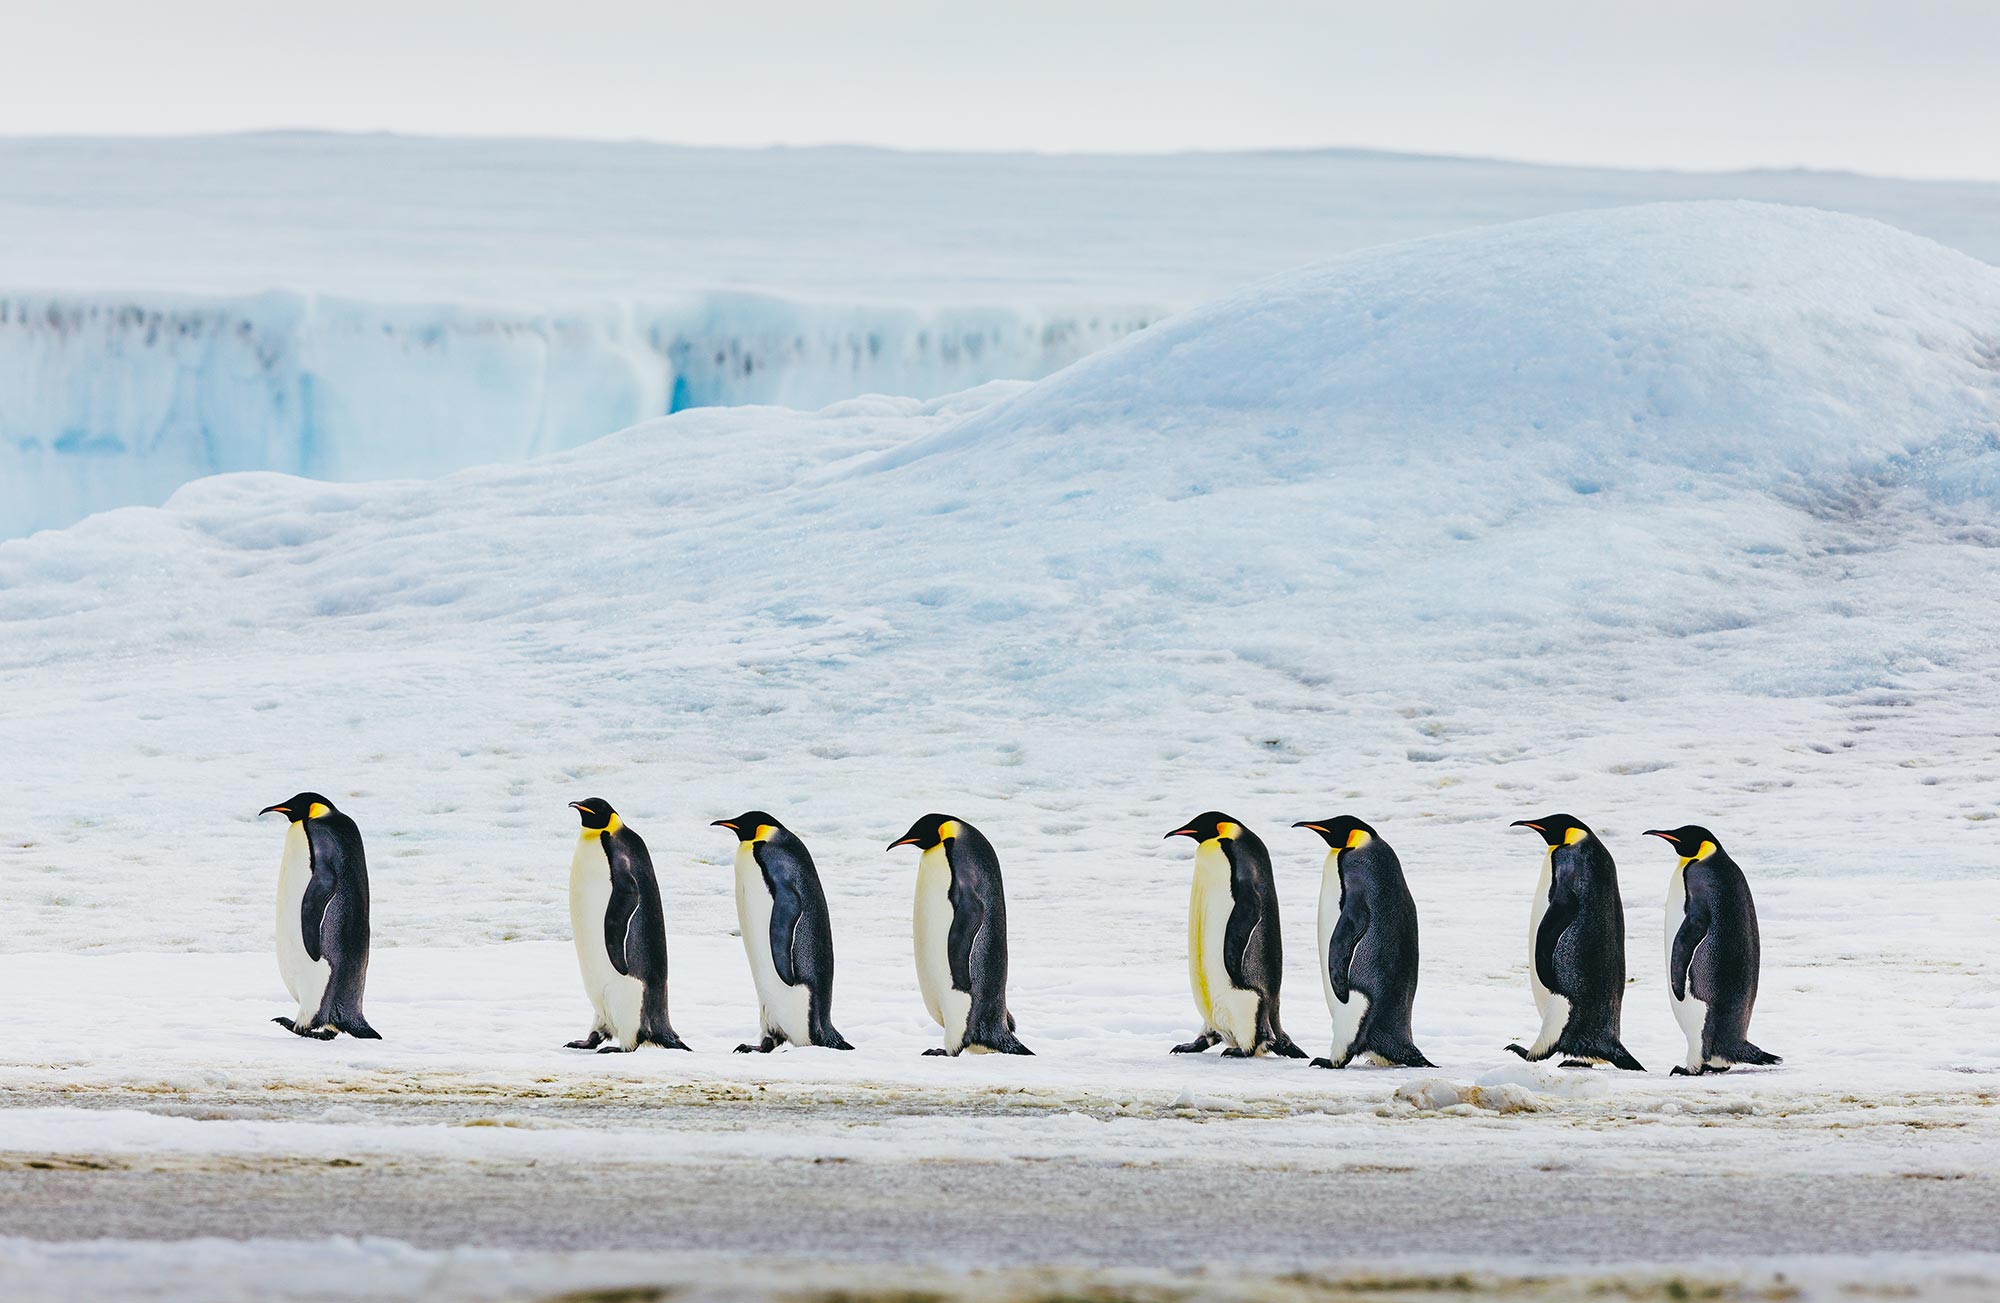 Why Did Penguins Stop Flying? The Answer Is Evolutionary